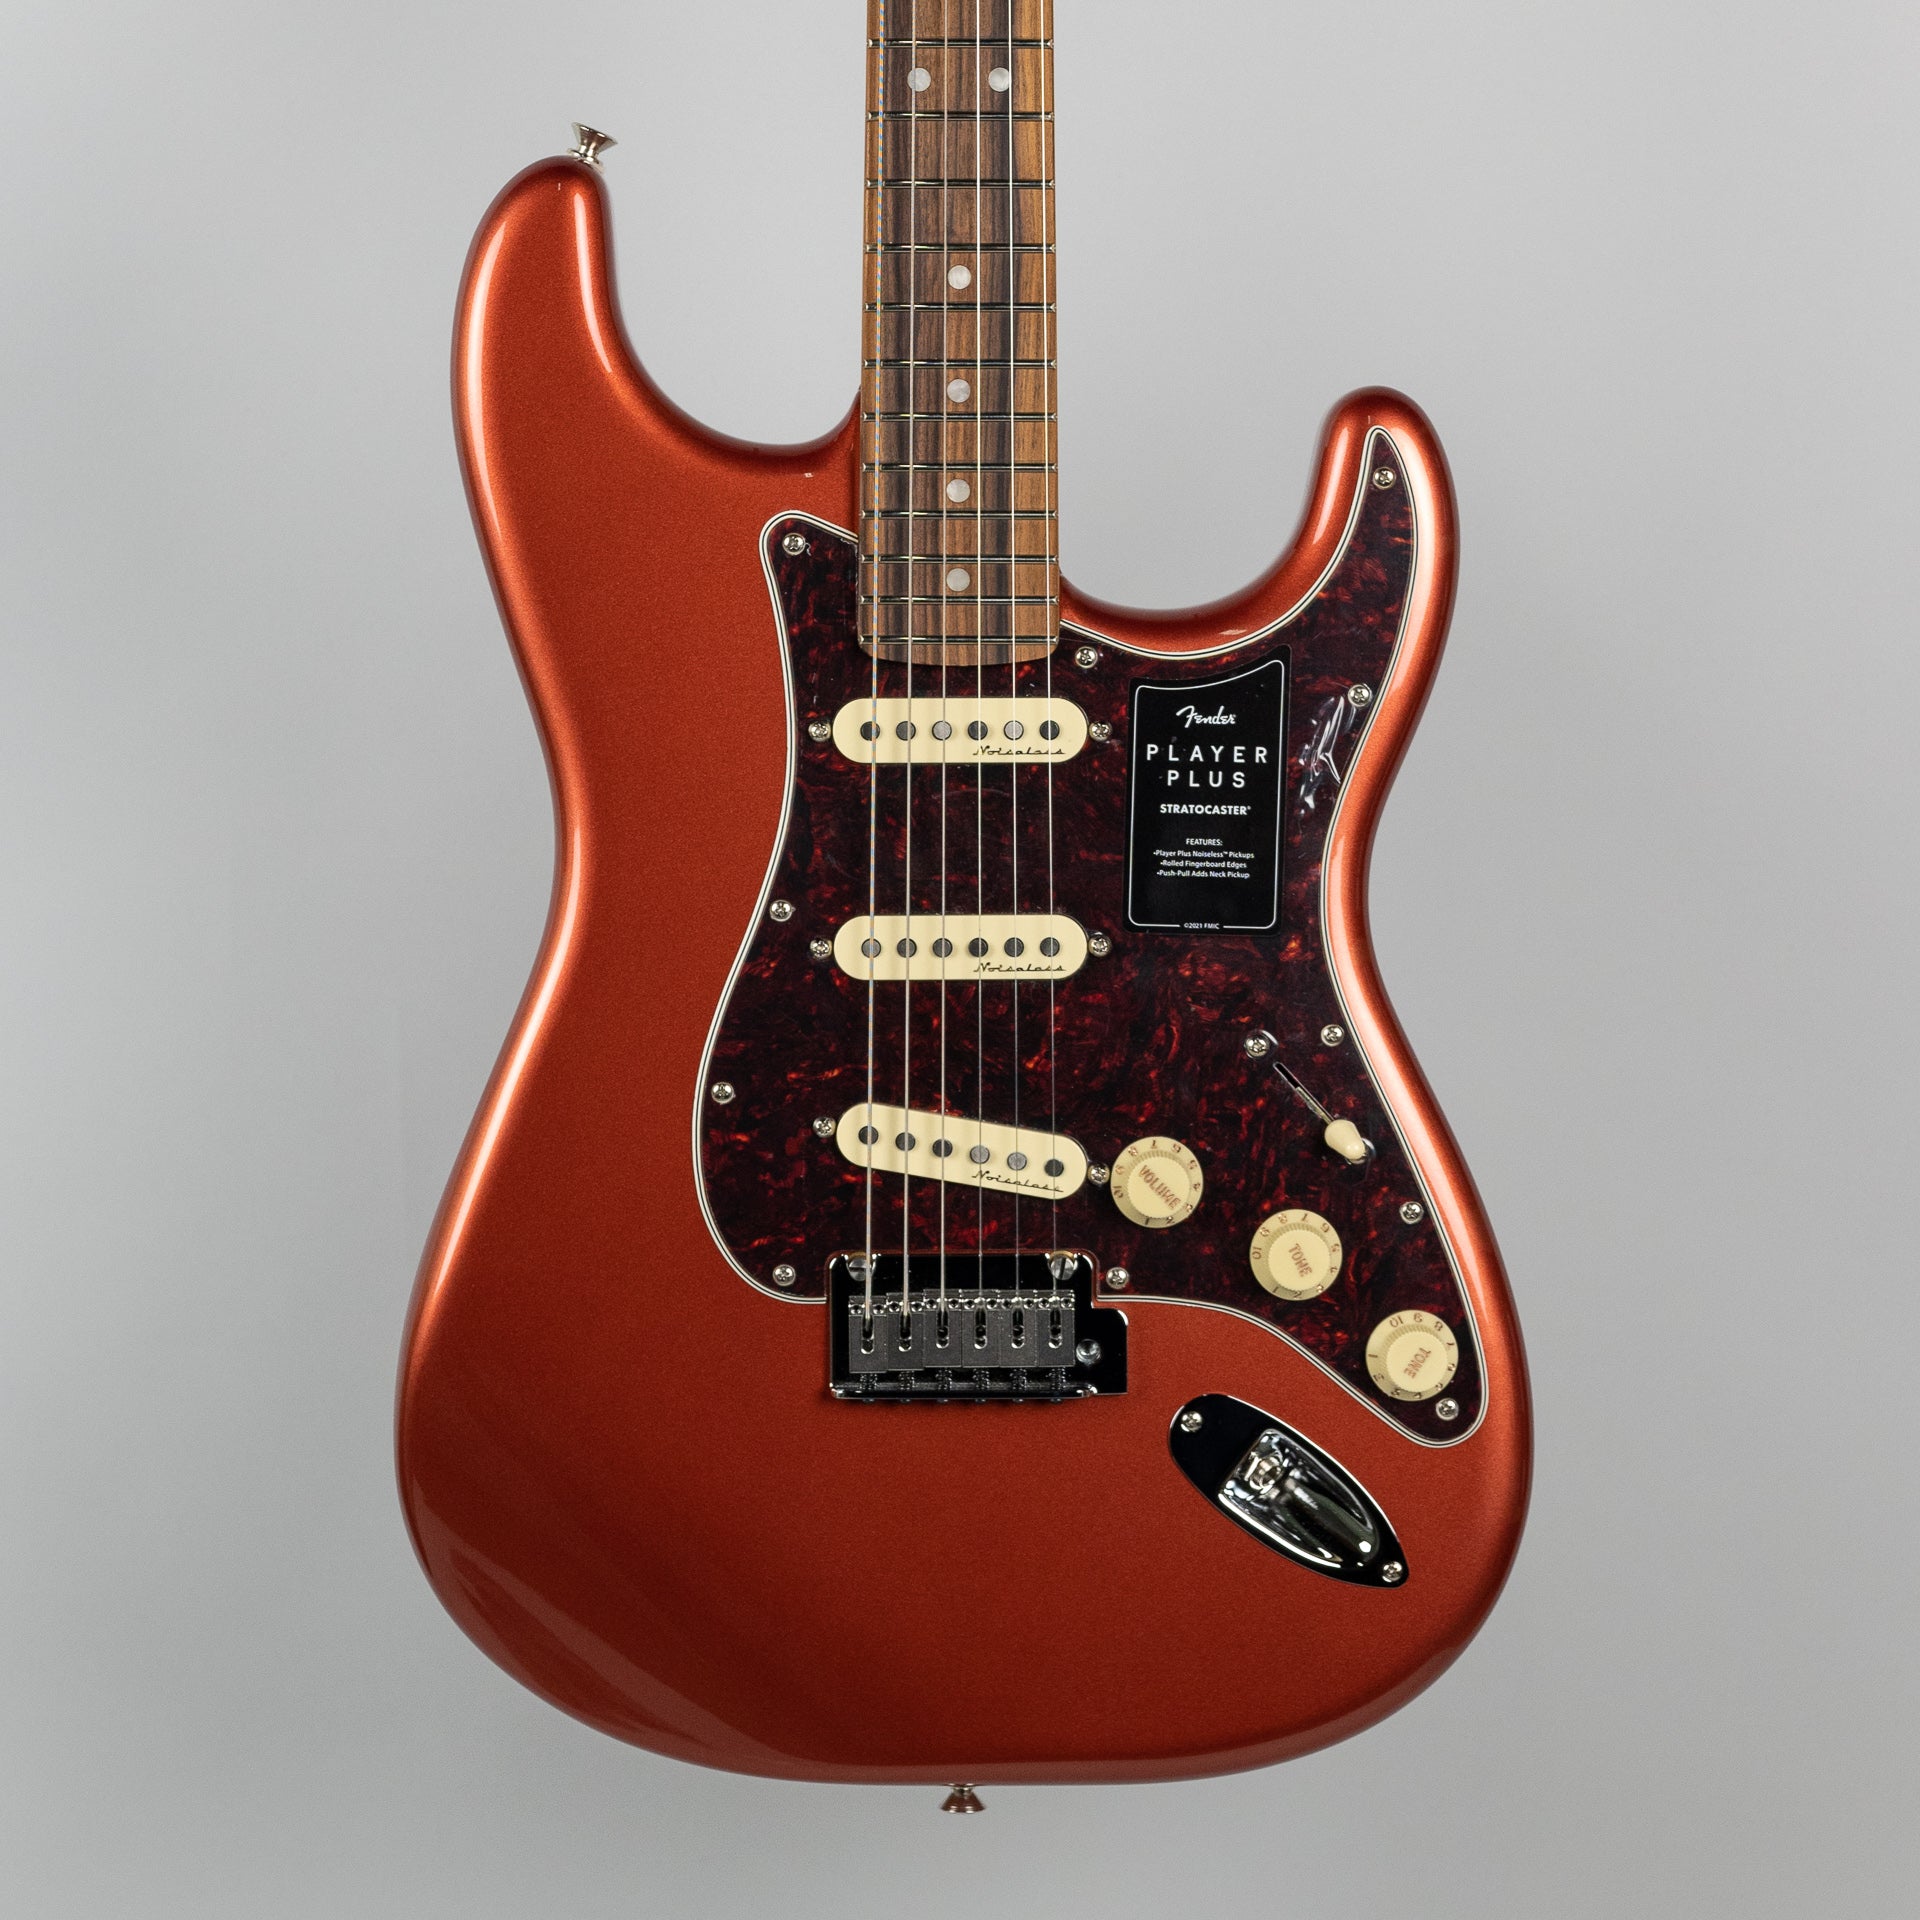 Plus　Player　Fender　Candy　–　Carlton　Stratocaster　Apple　in　Red　Aged　(MX21163765)　Music　Center